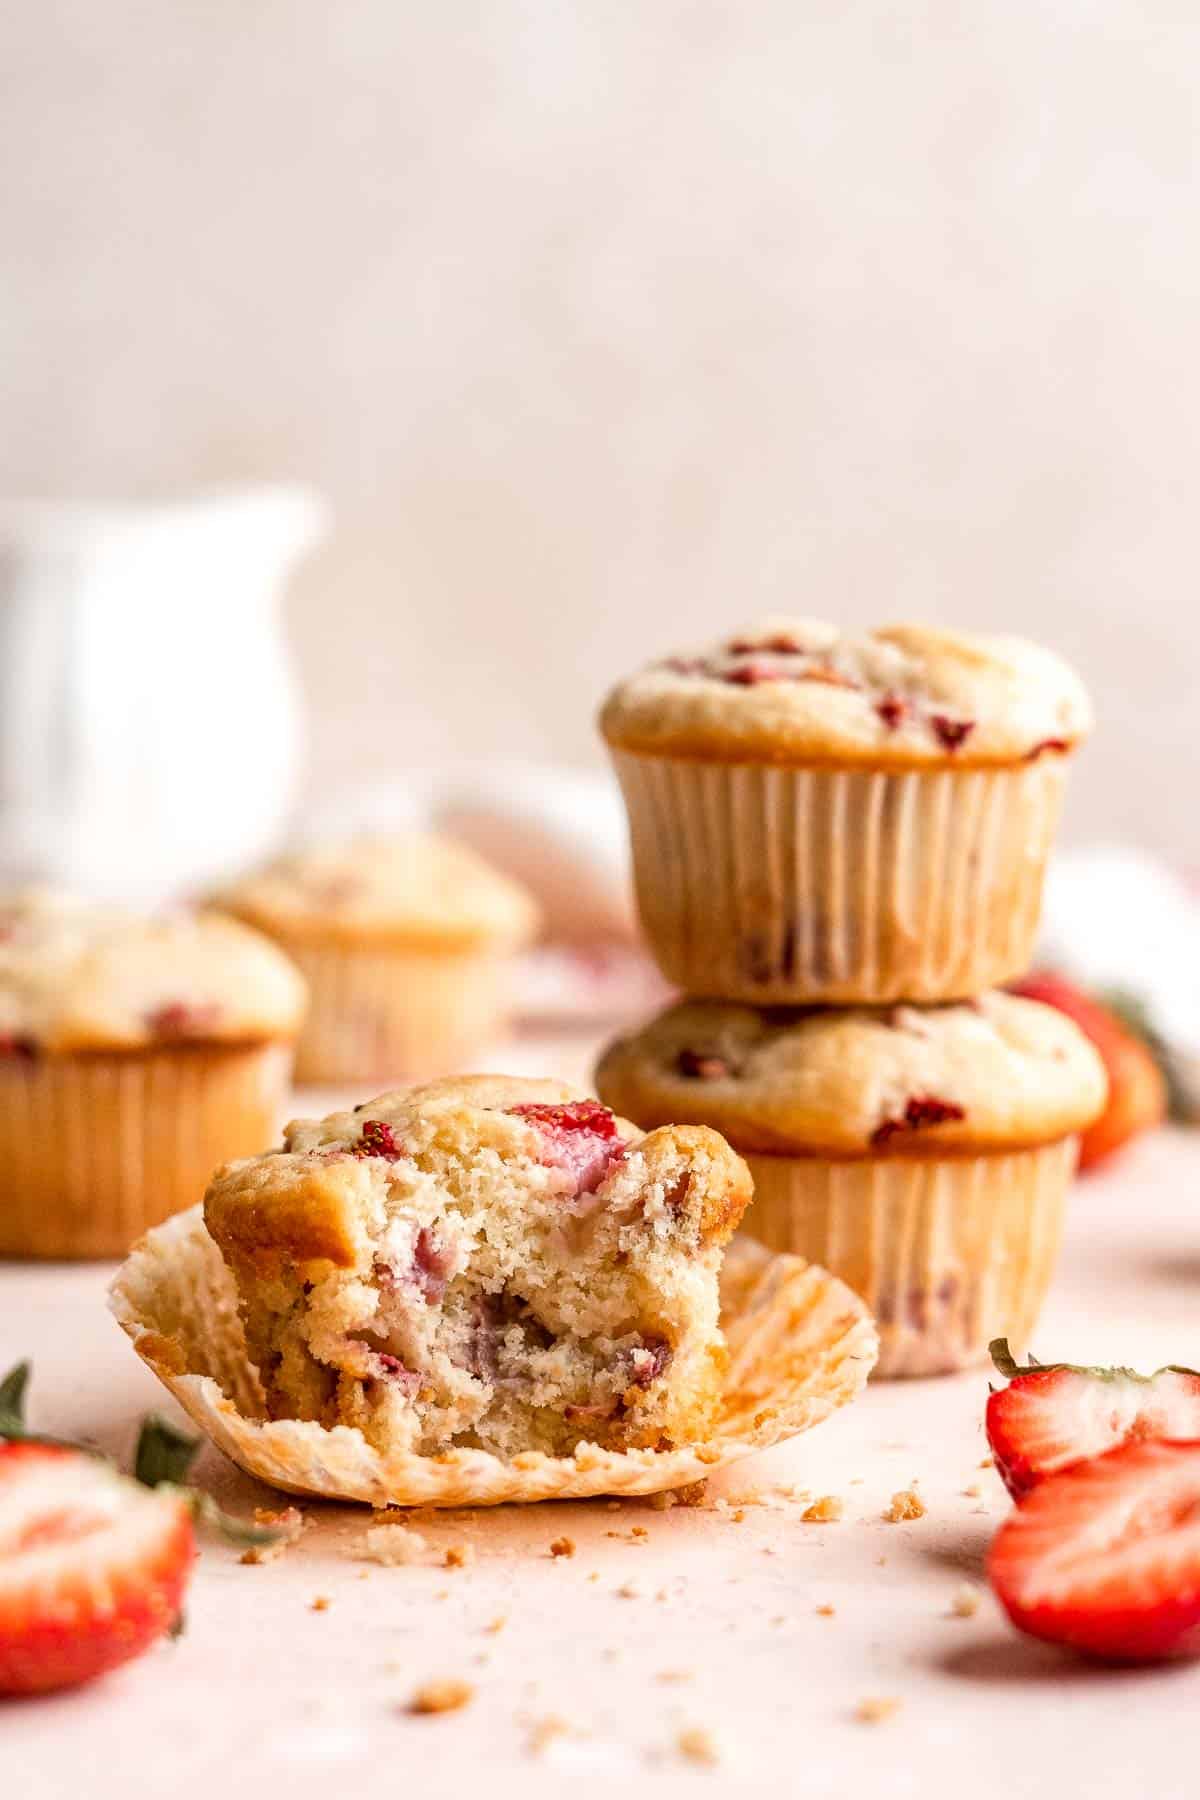 Strawberry Muffins are tender, fluffy, and delicious! They are golden-brown and crisp outside while moist and cake-like inside and loaded with strawberries. | aheadofthyme.com